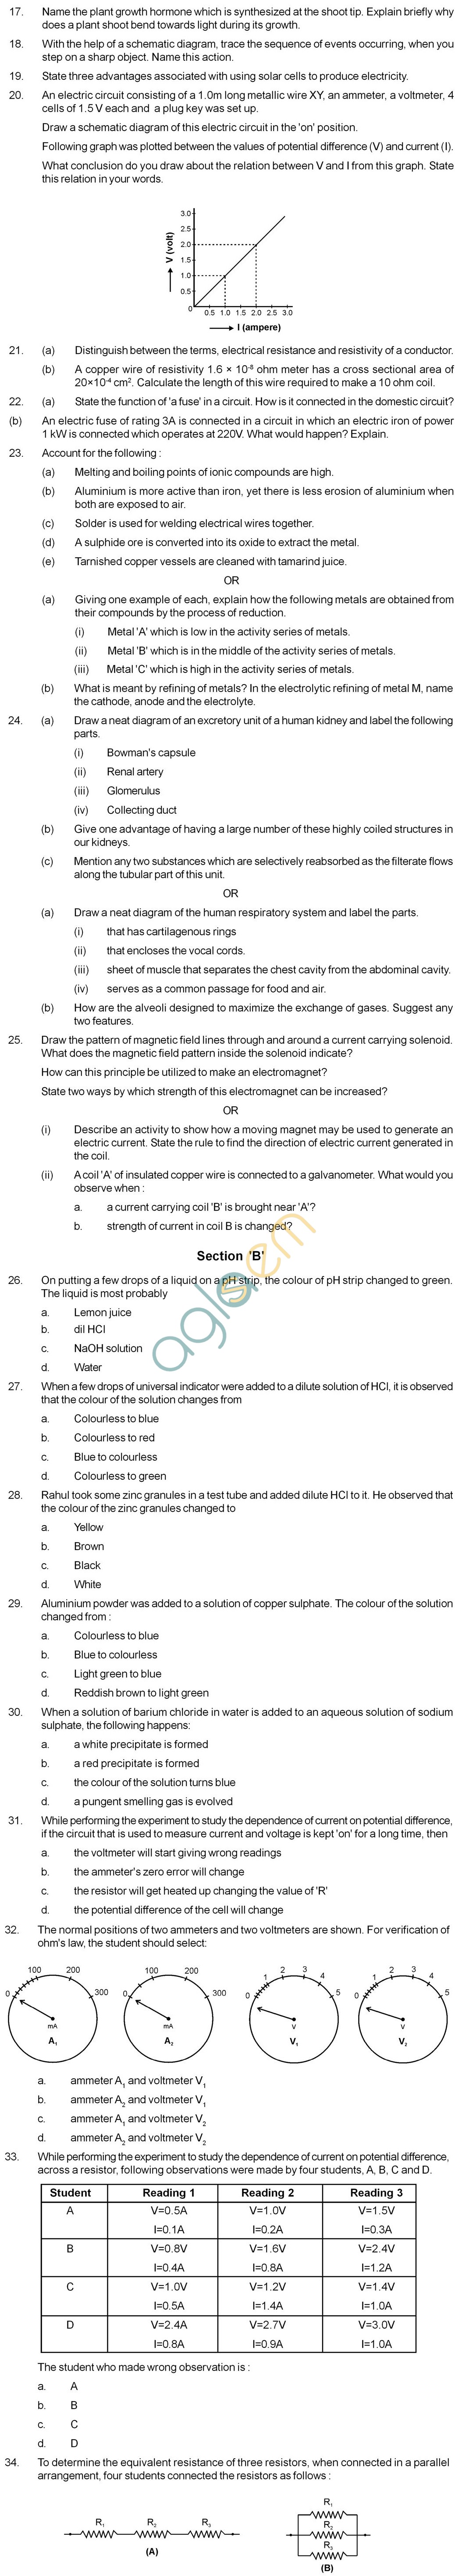 CBSE Board Exam 2013 Sample Papers (SA1) Class X - Science